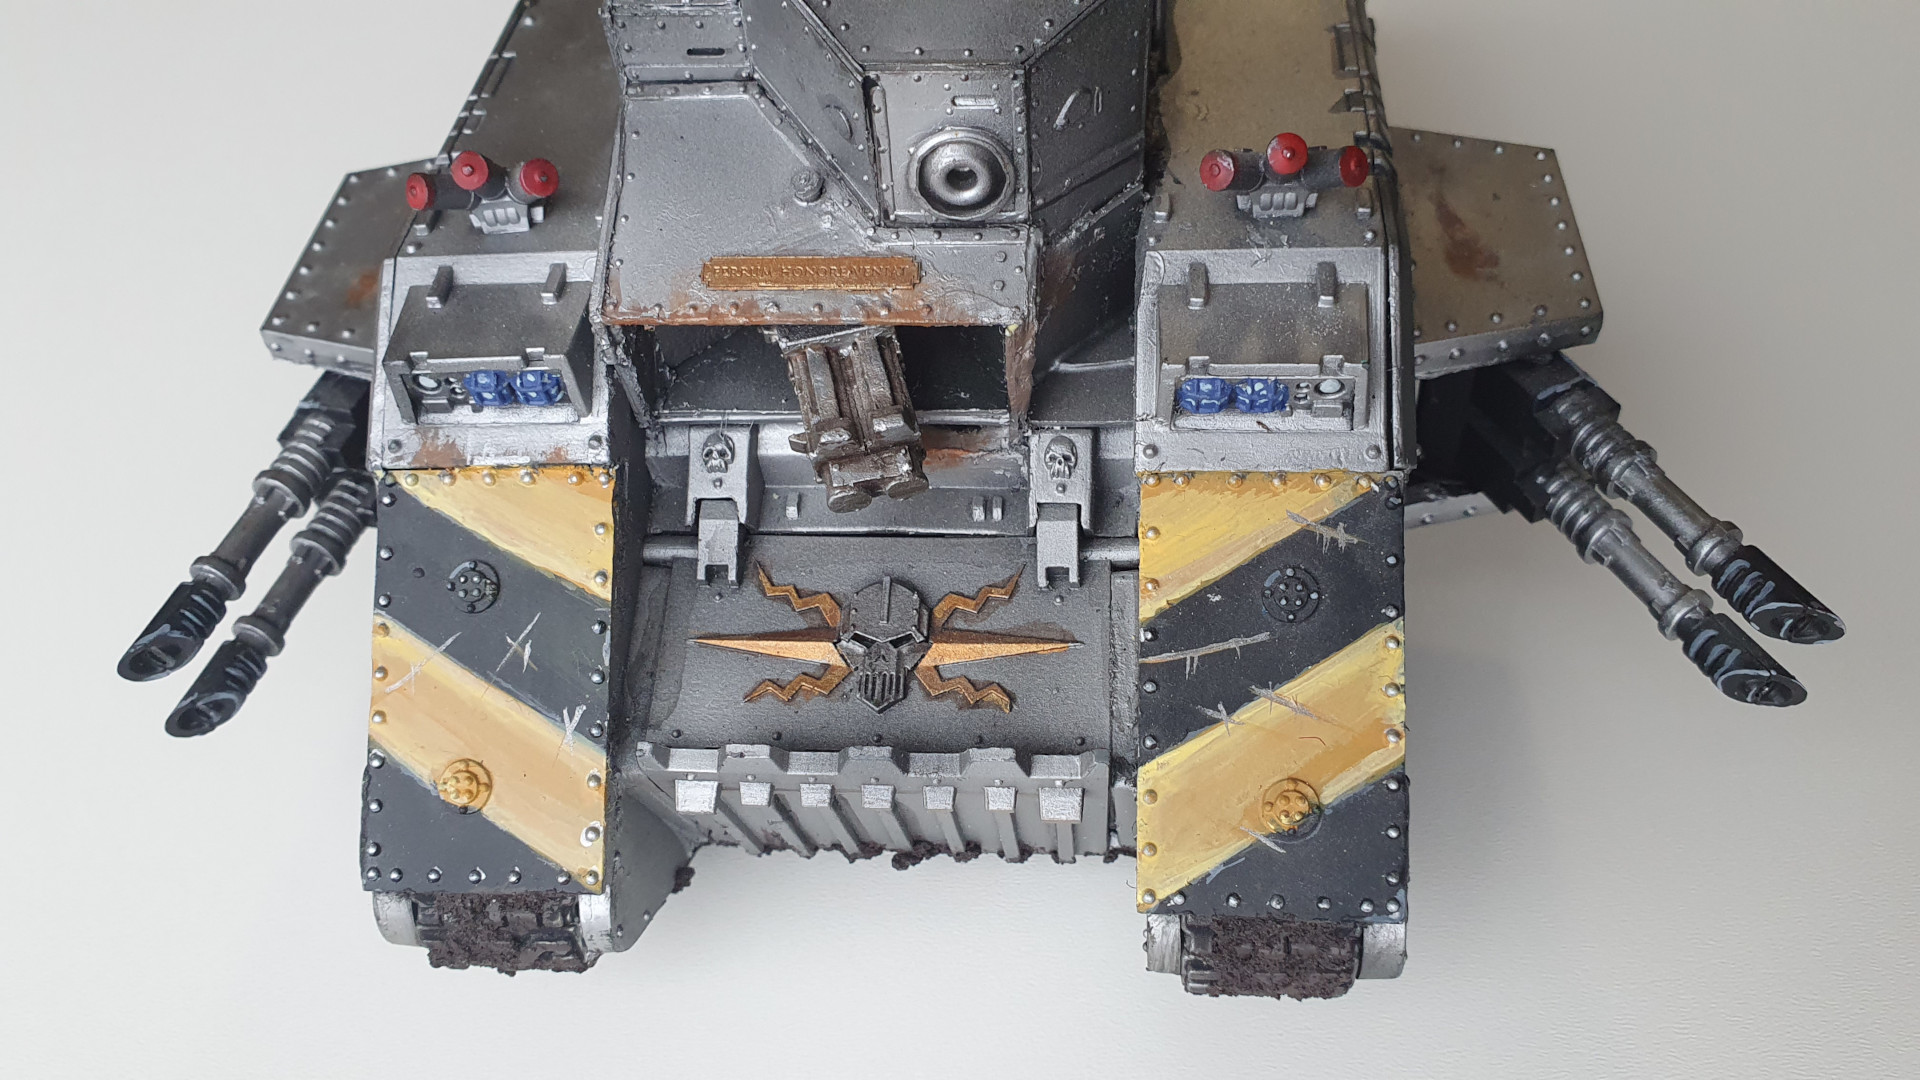 Iron Warriors Land Raider - a heavy assault vehicle with silver armour, massive sponson mounted lascannons, and hull modifications